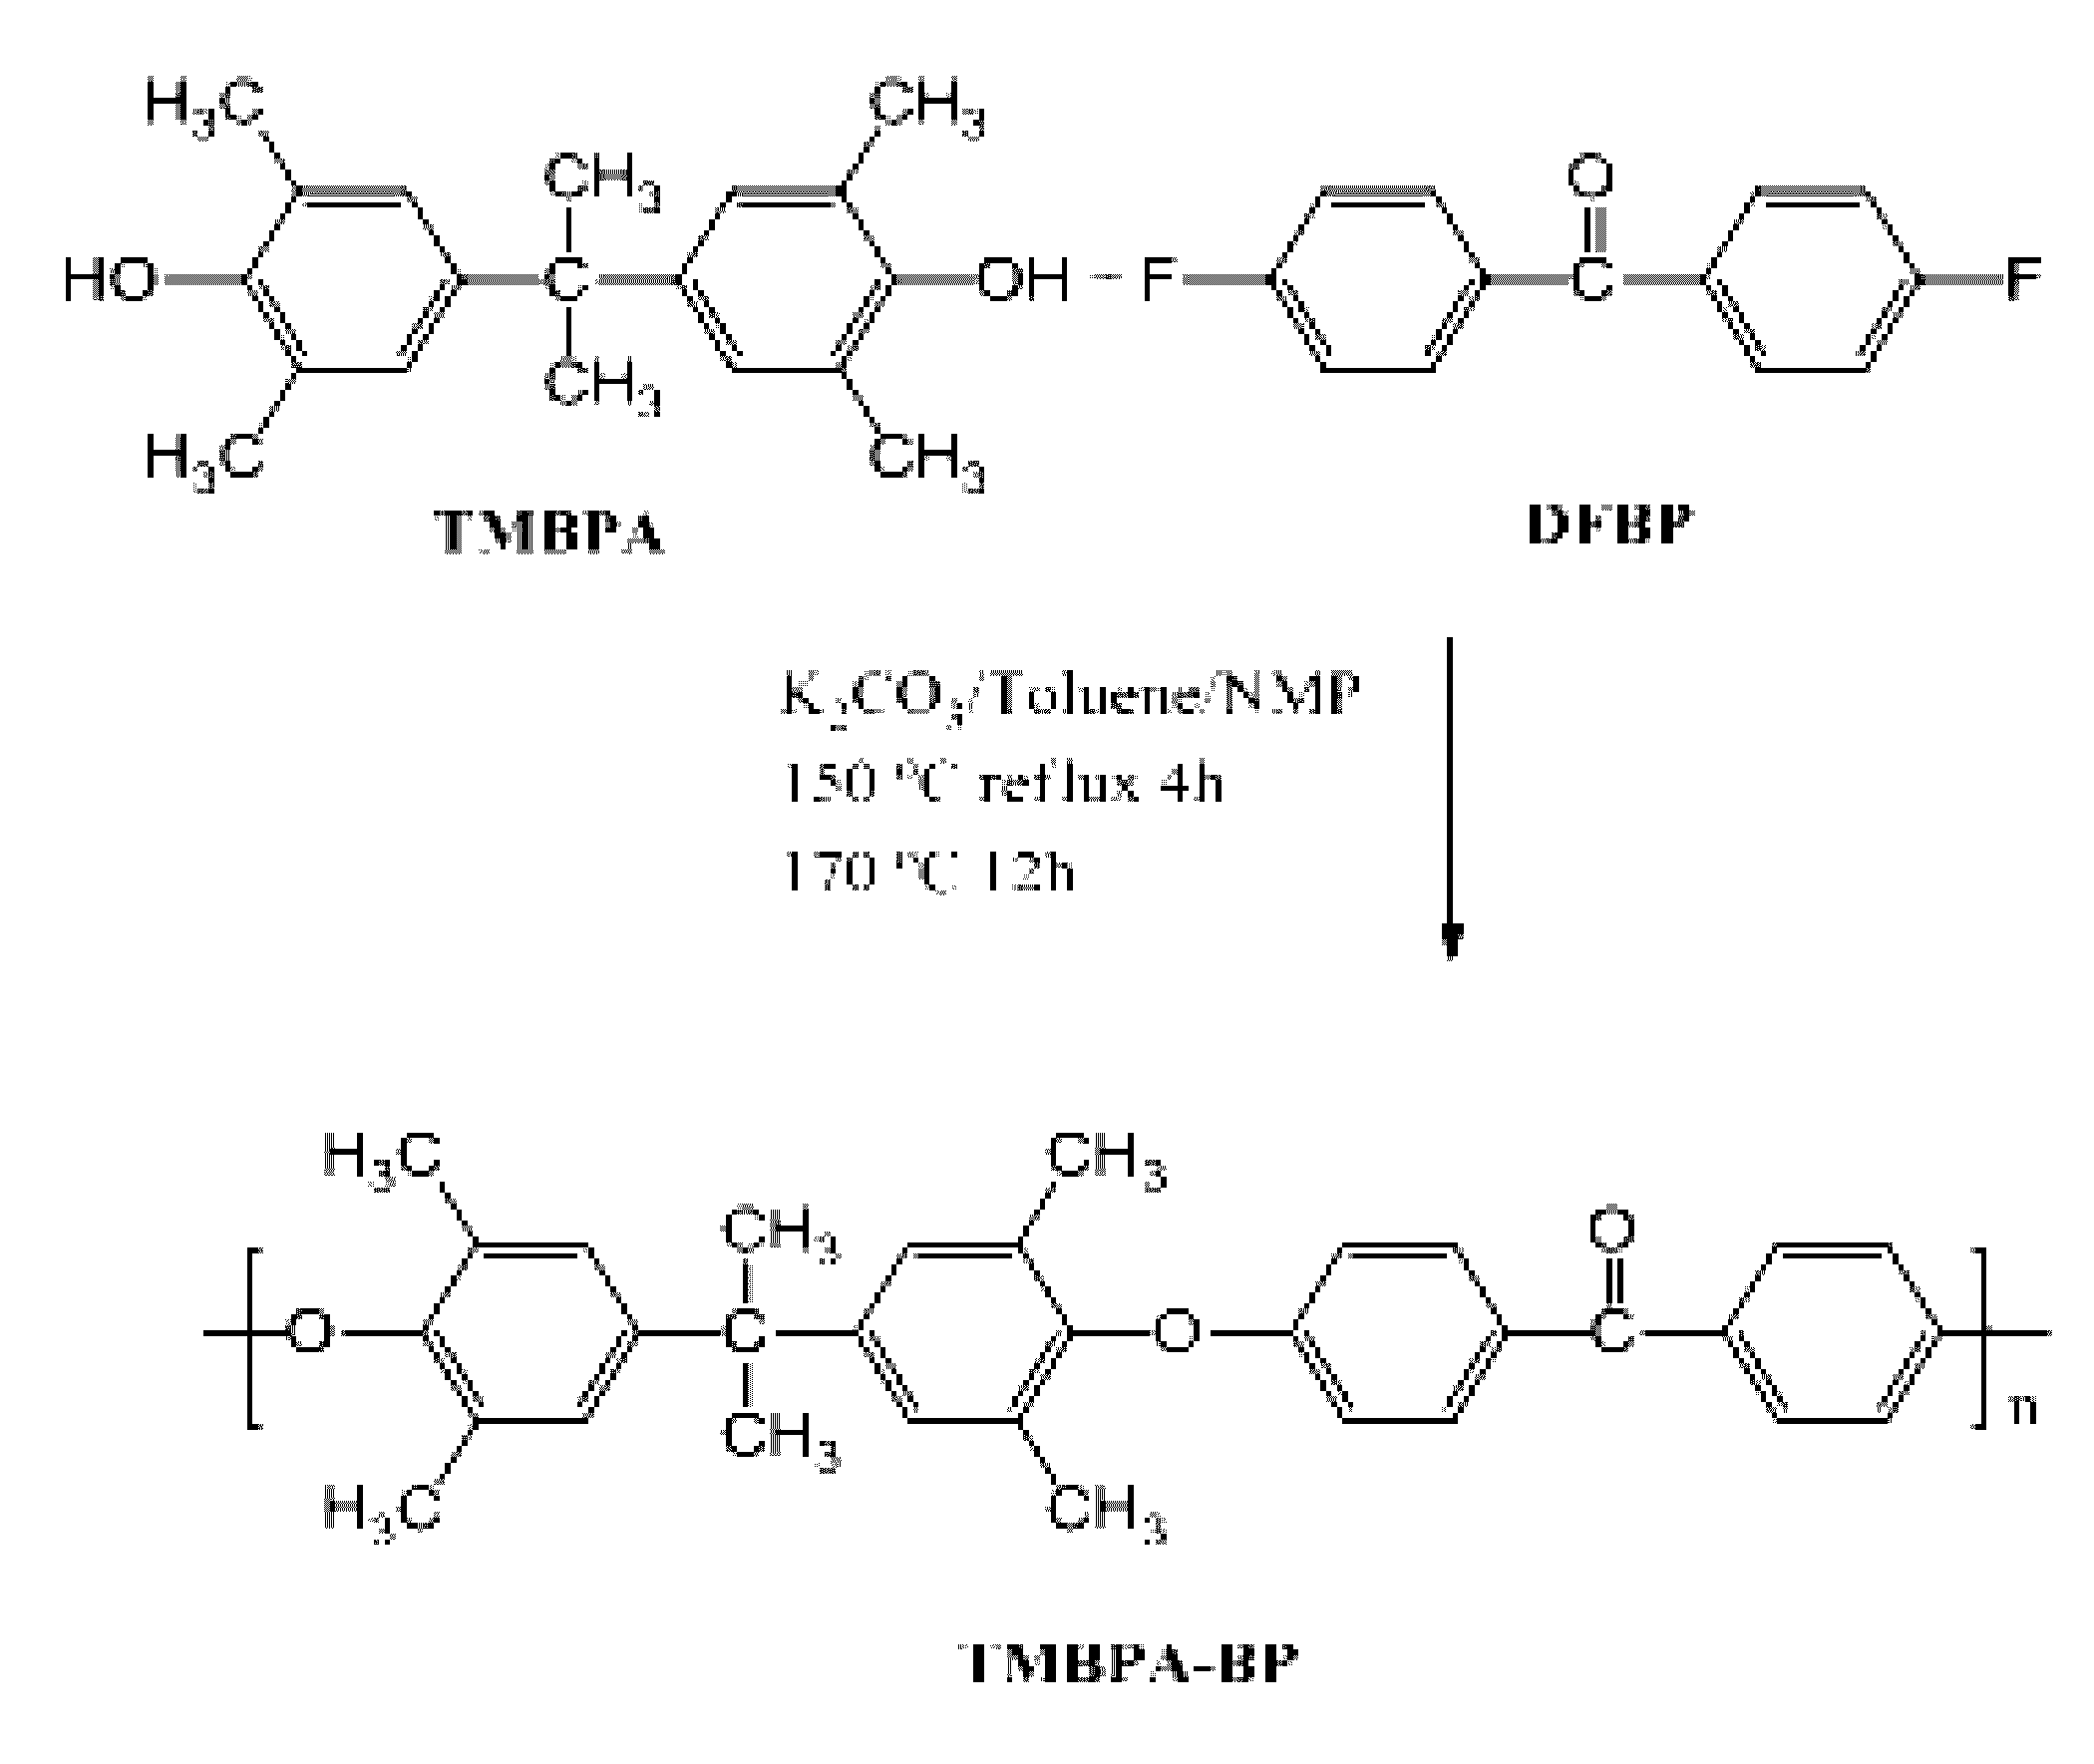 Crosslinked polymer compositions, gas separation membranes of such crosslinked polymer compositions, methods of making such membranes, and methods of separating gases using such membranes